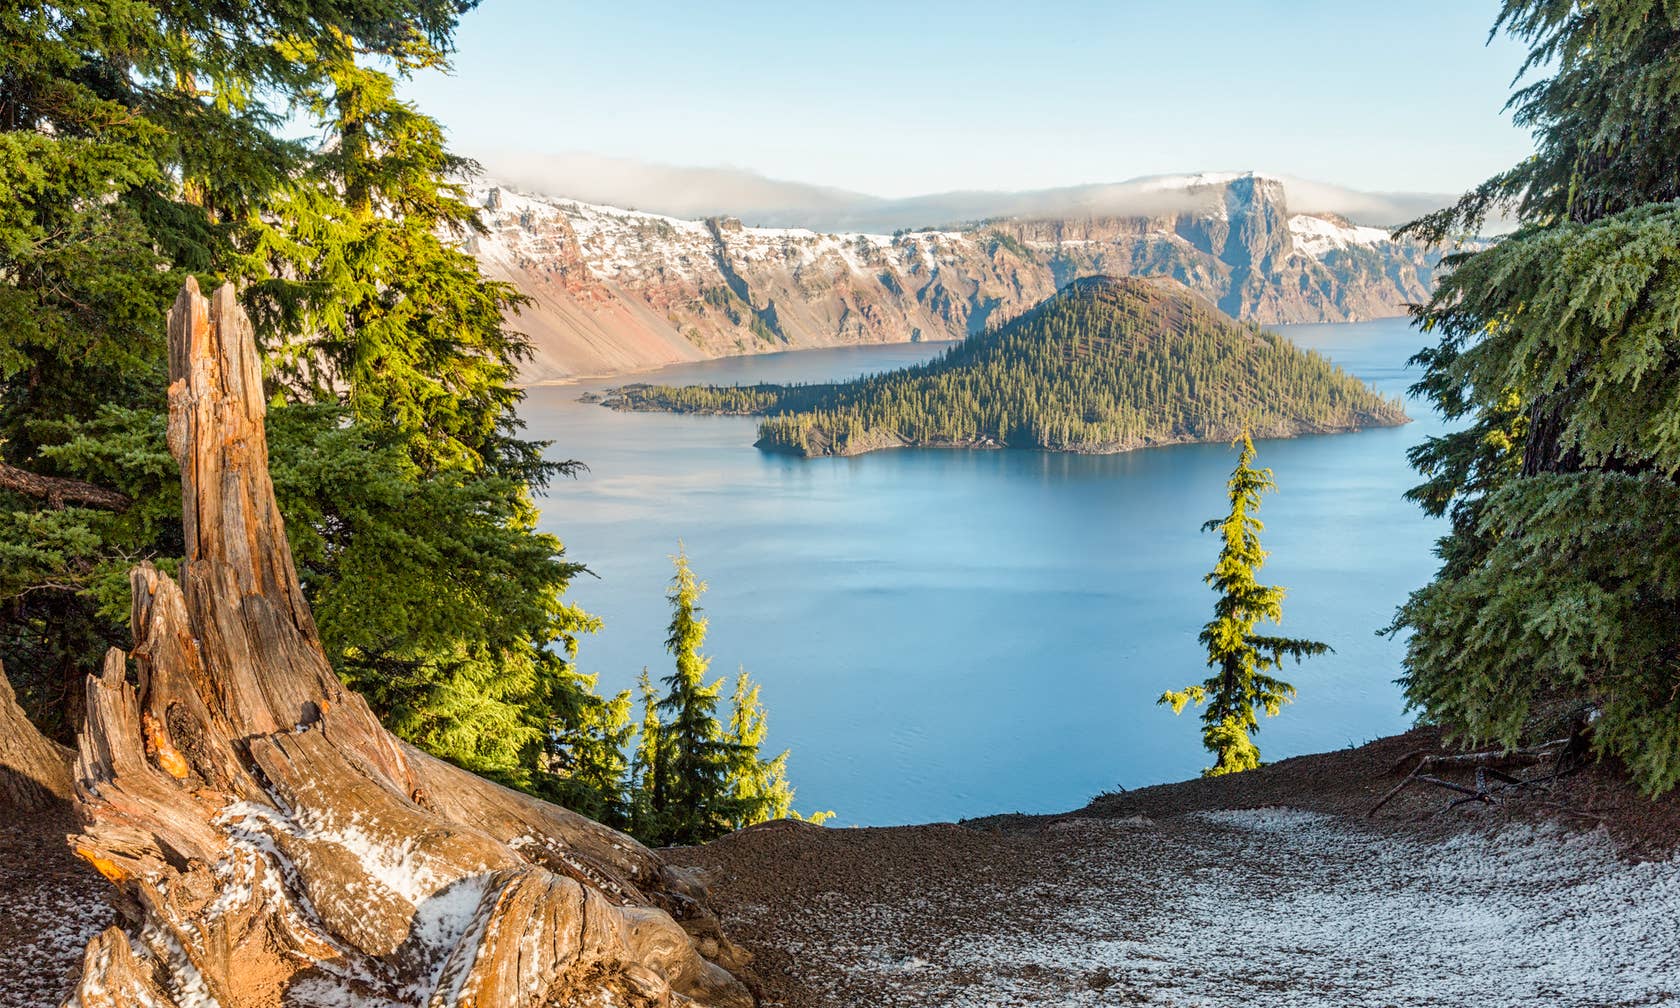 Holiday rentals in Crater Lake